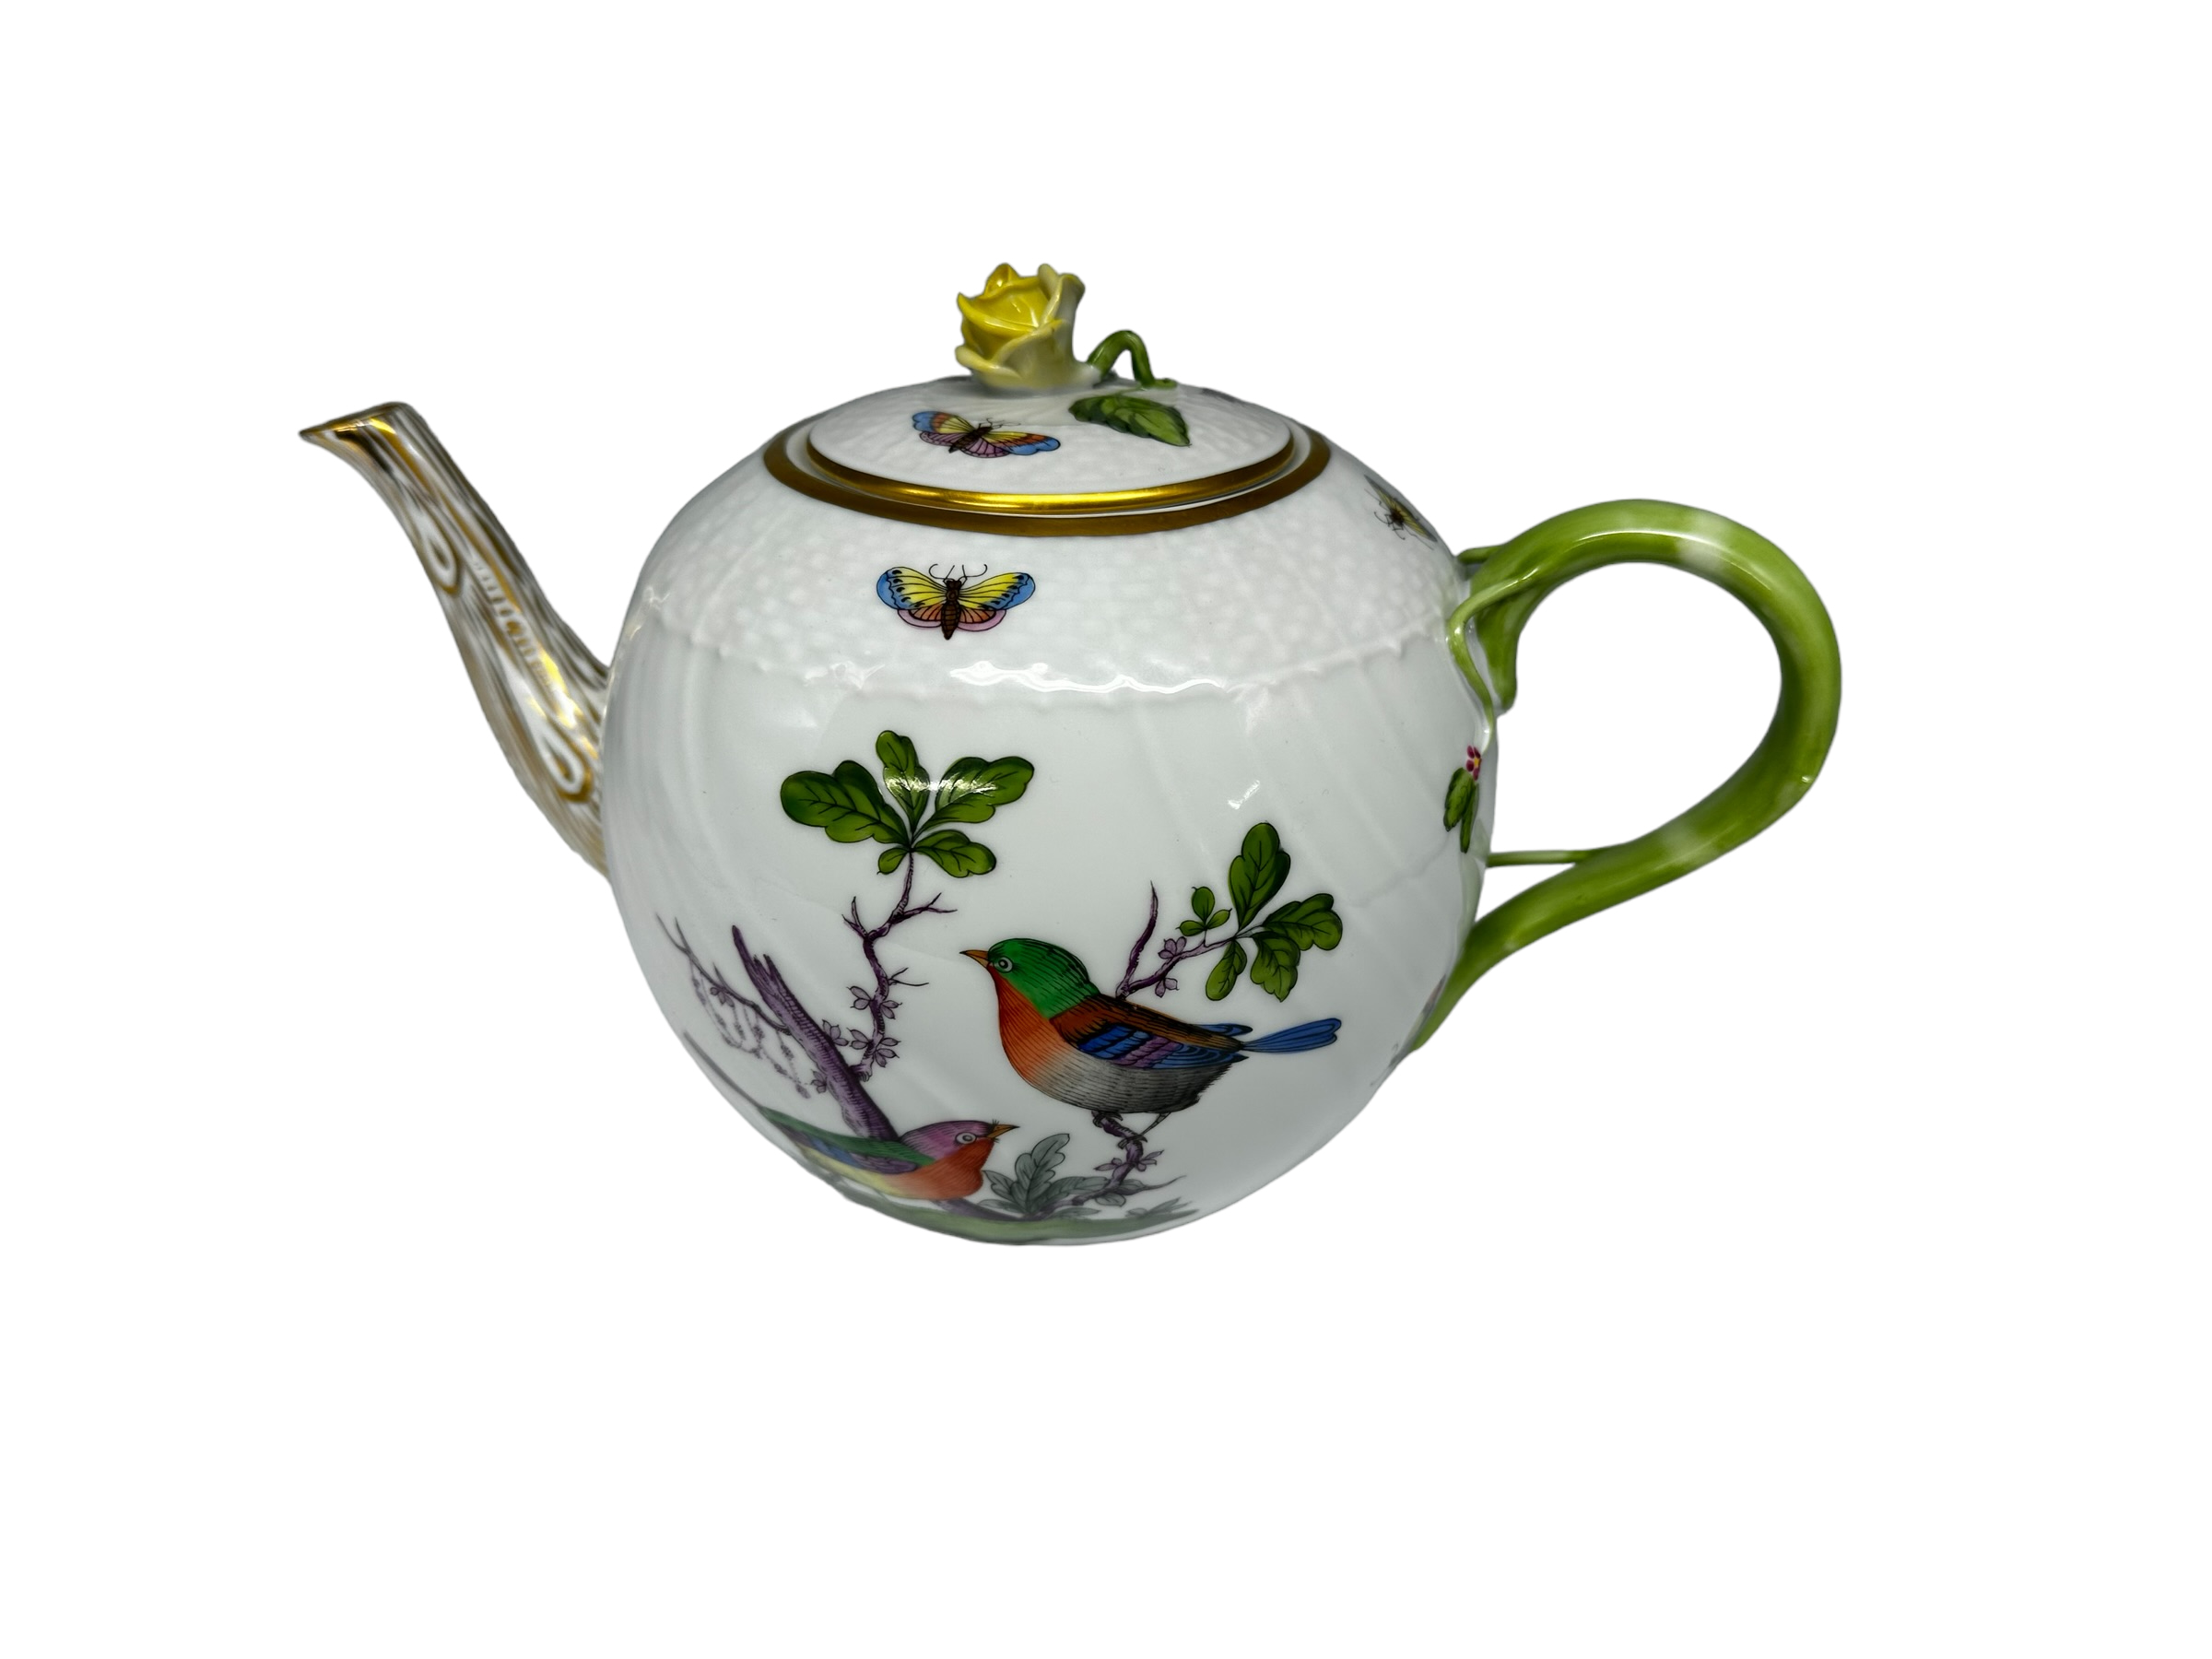 A Herend hand painted porcelain teapot.